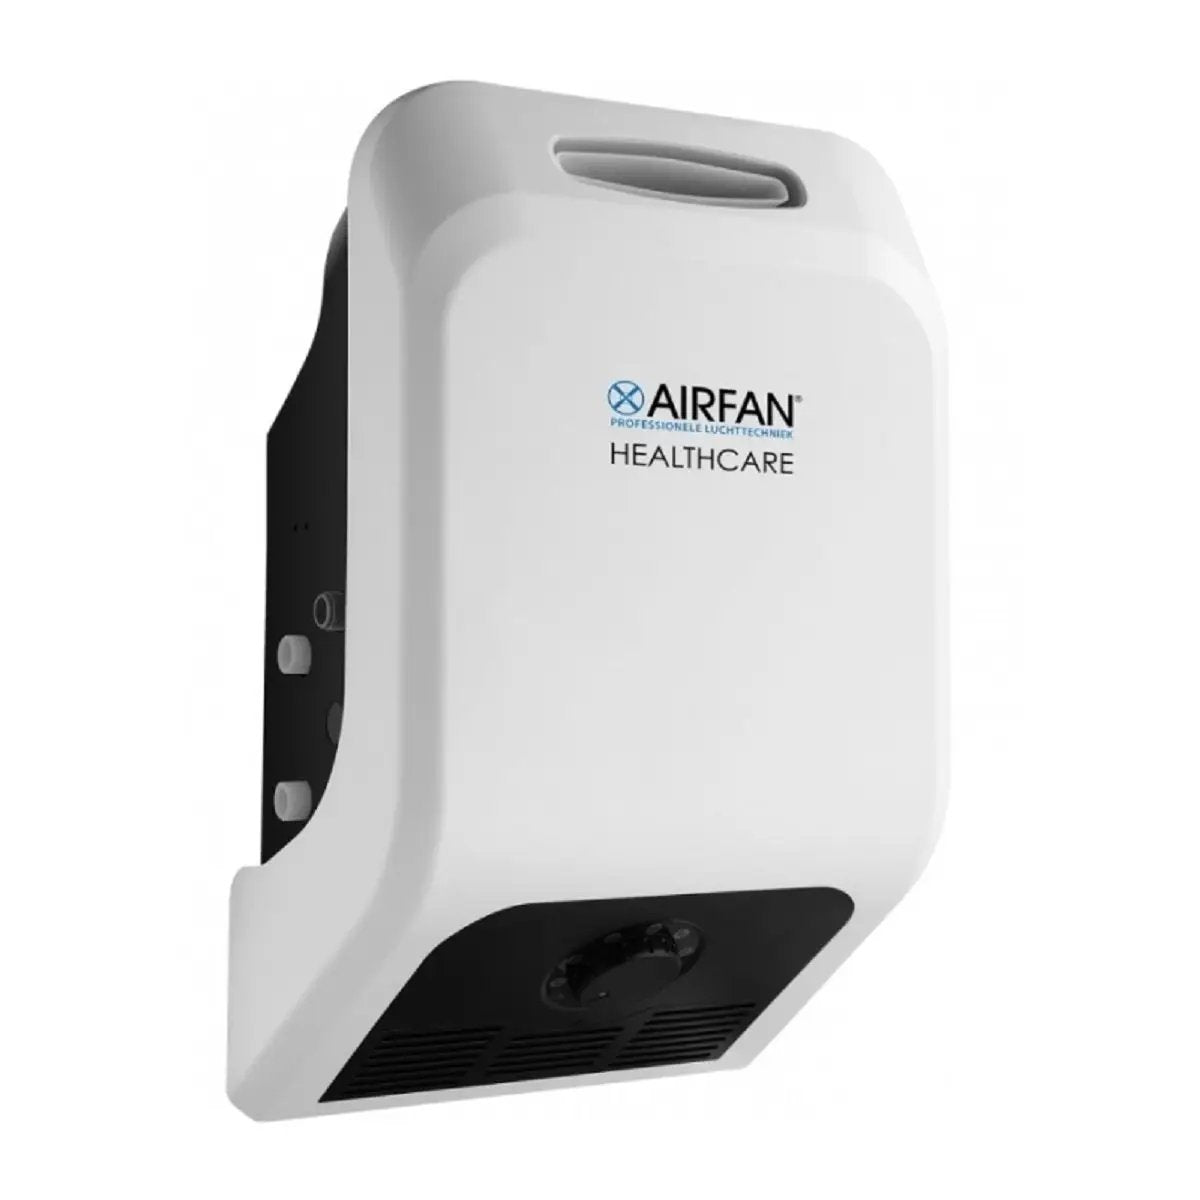 Airfan Healthcare HS-300 – Wandbefeuchter